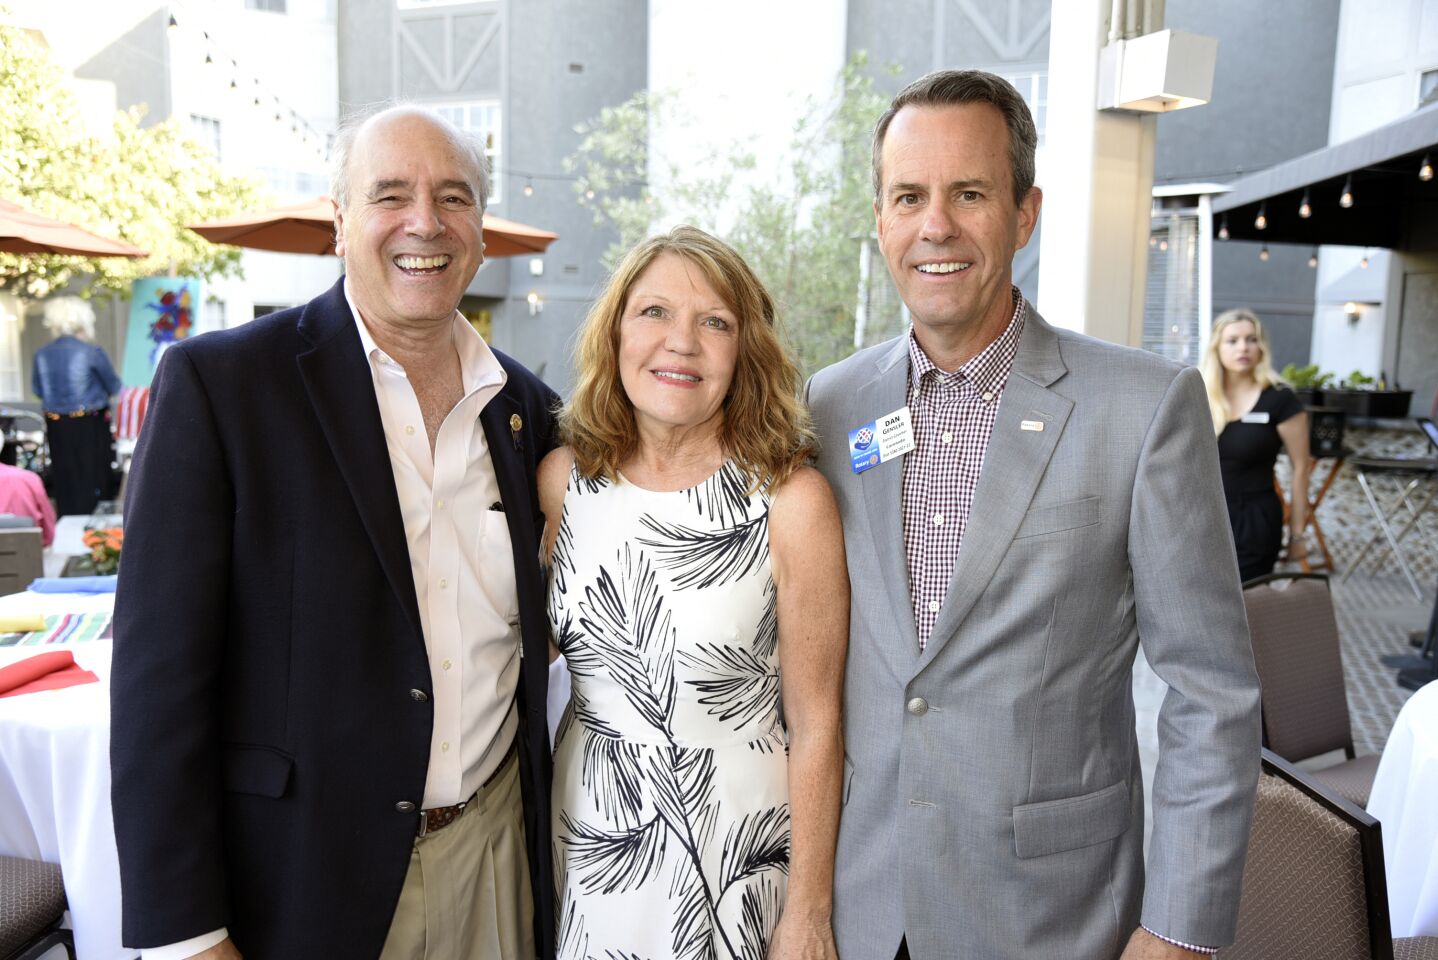 Past President/Immediate Past District Governor District 5340 Steve Weitzen, President/event chair Vicky Mallett, District Governor District 5340 Dan Gensler